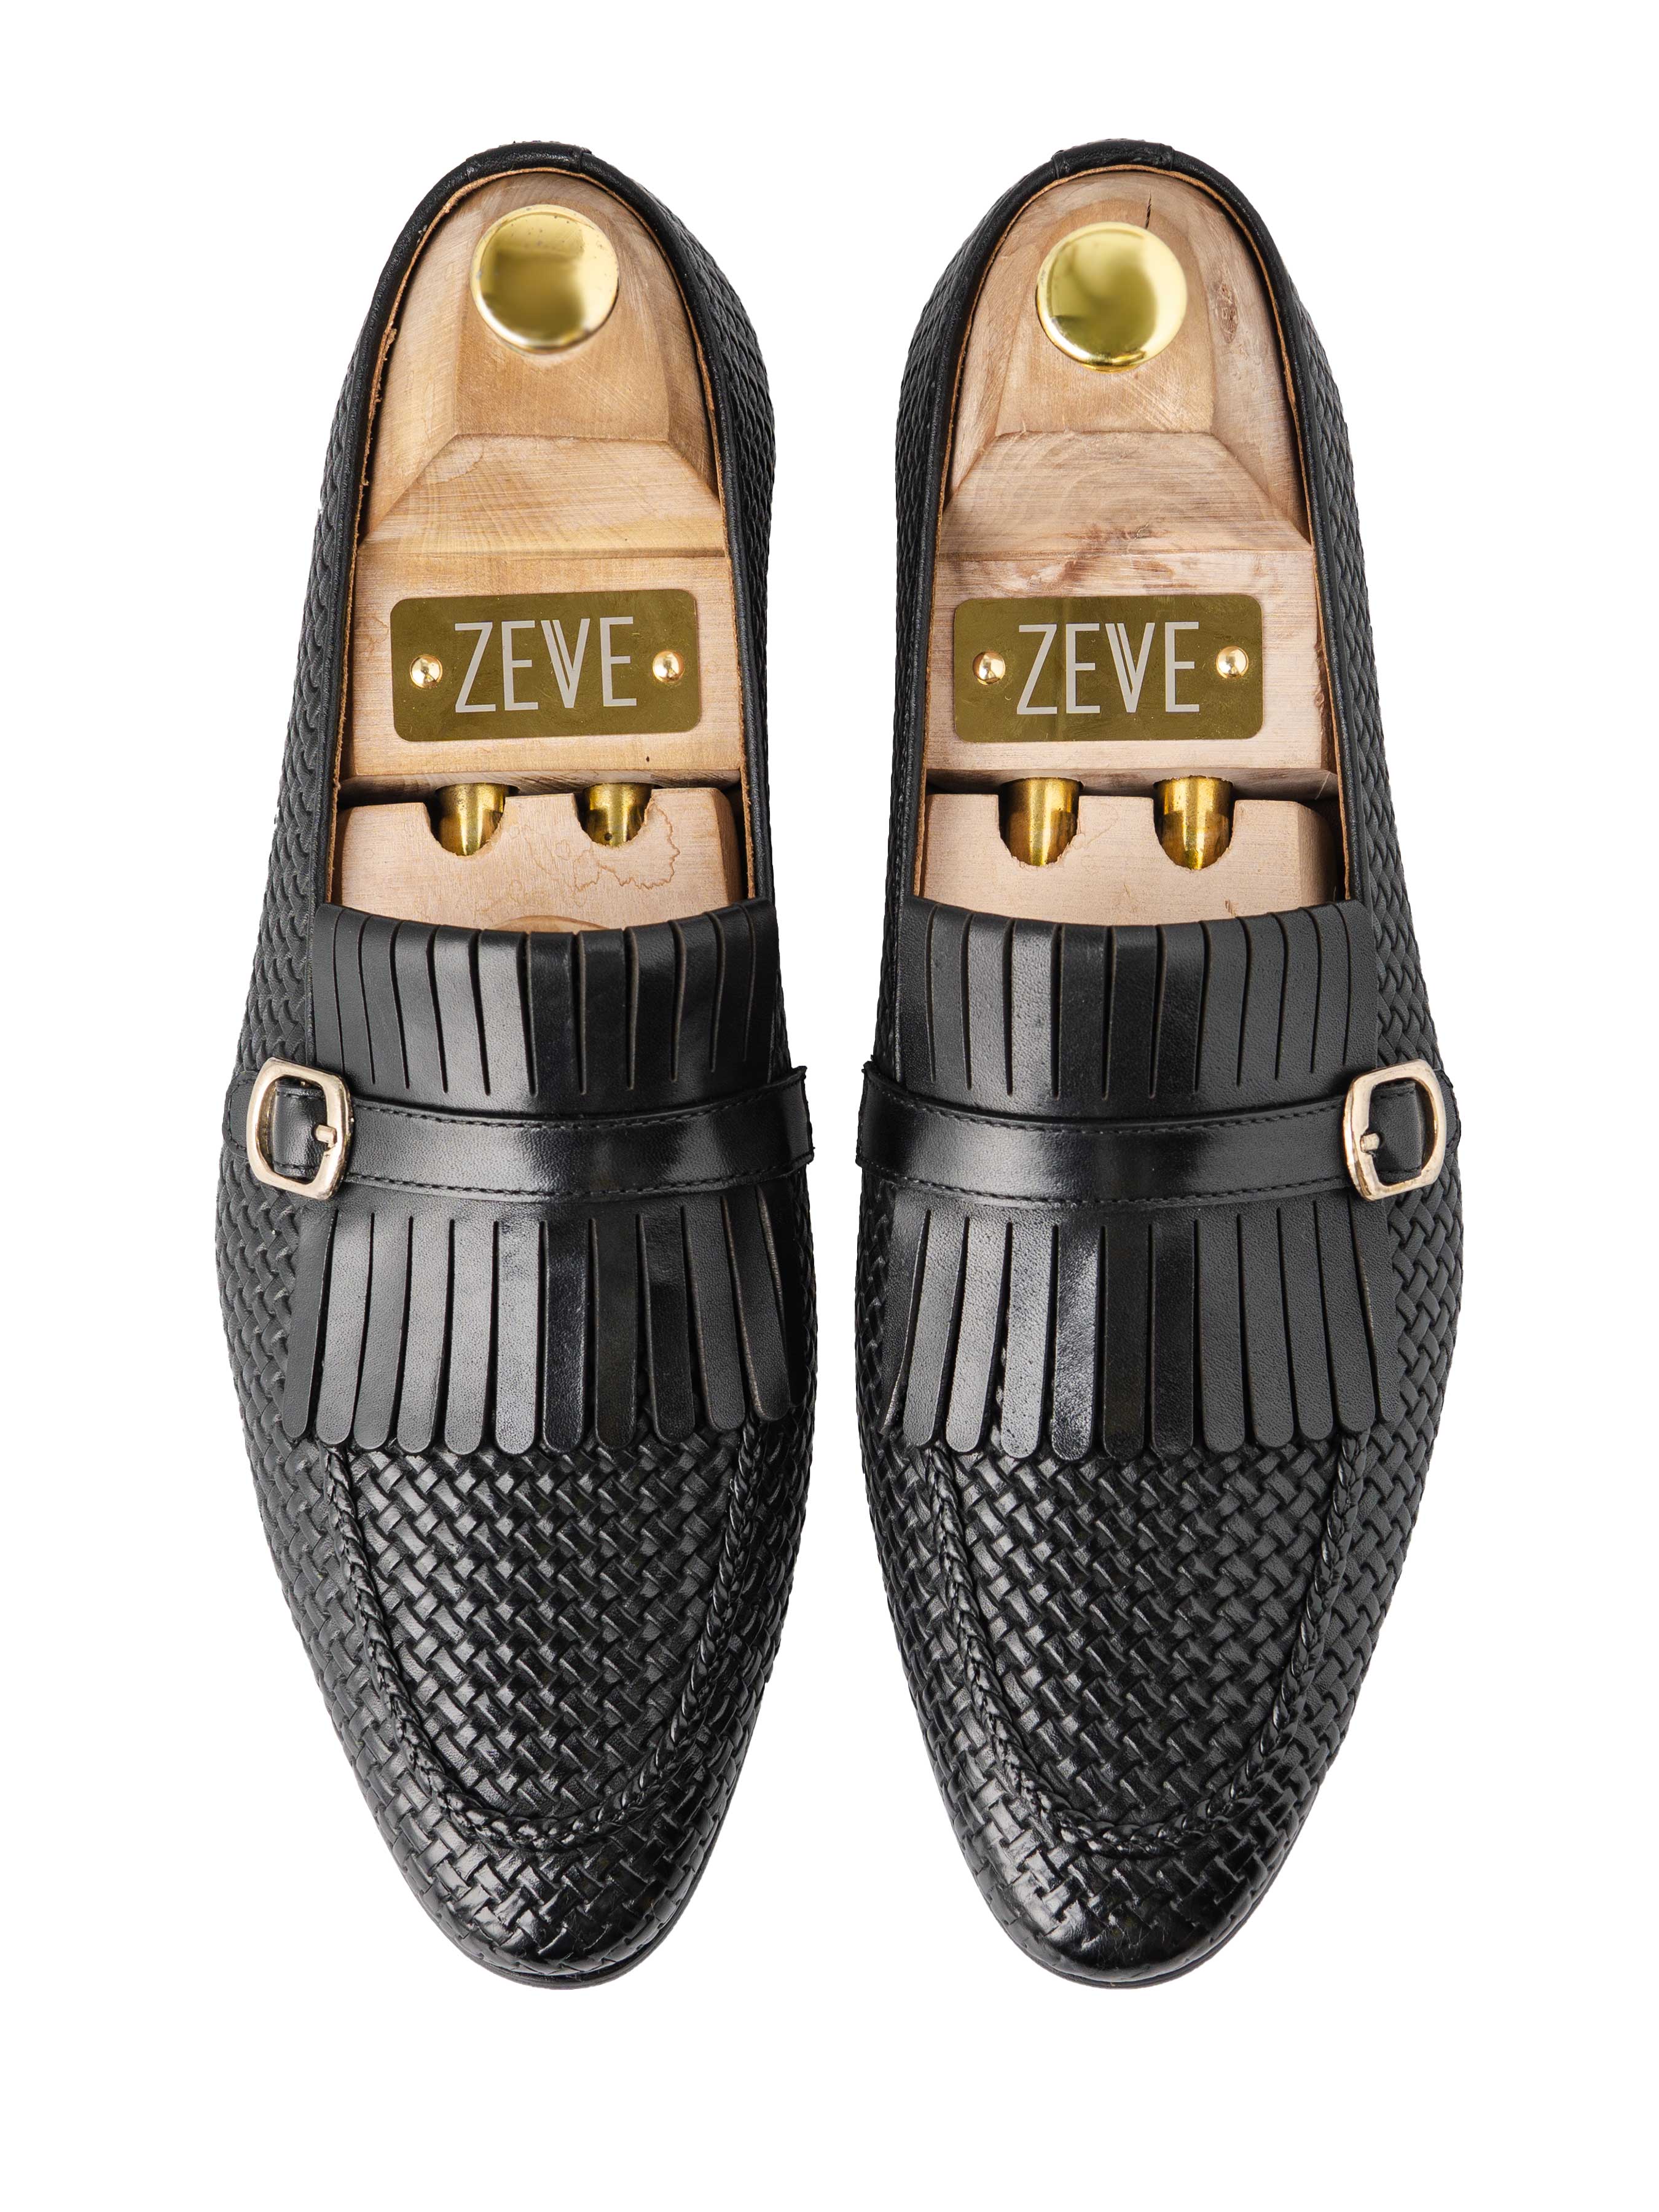 Fringe Kiltie Loafer - Black Woven Leather with Side Buckle (Hand Painted Patina) - Zeve Shoes